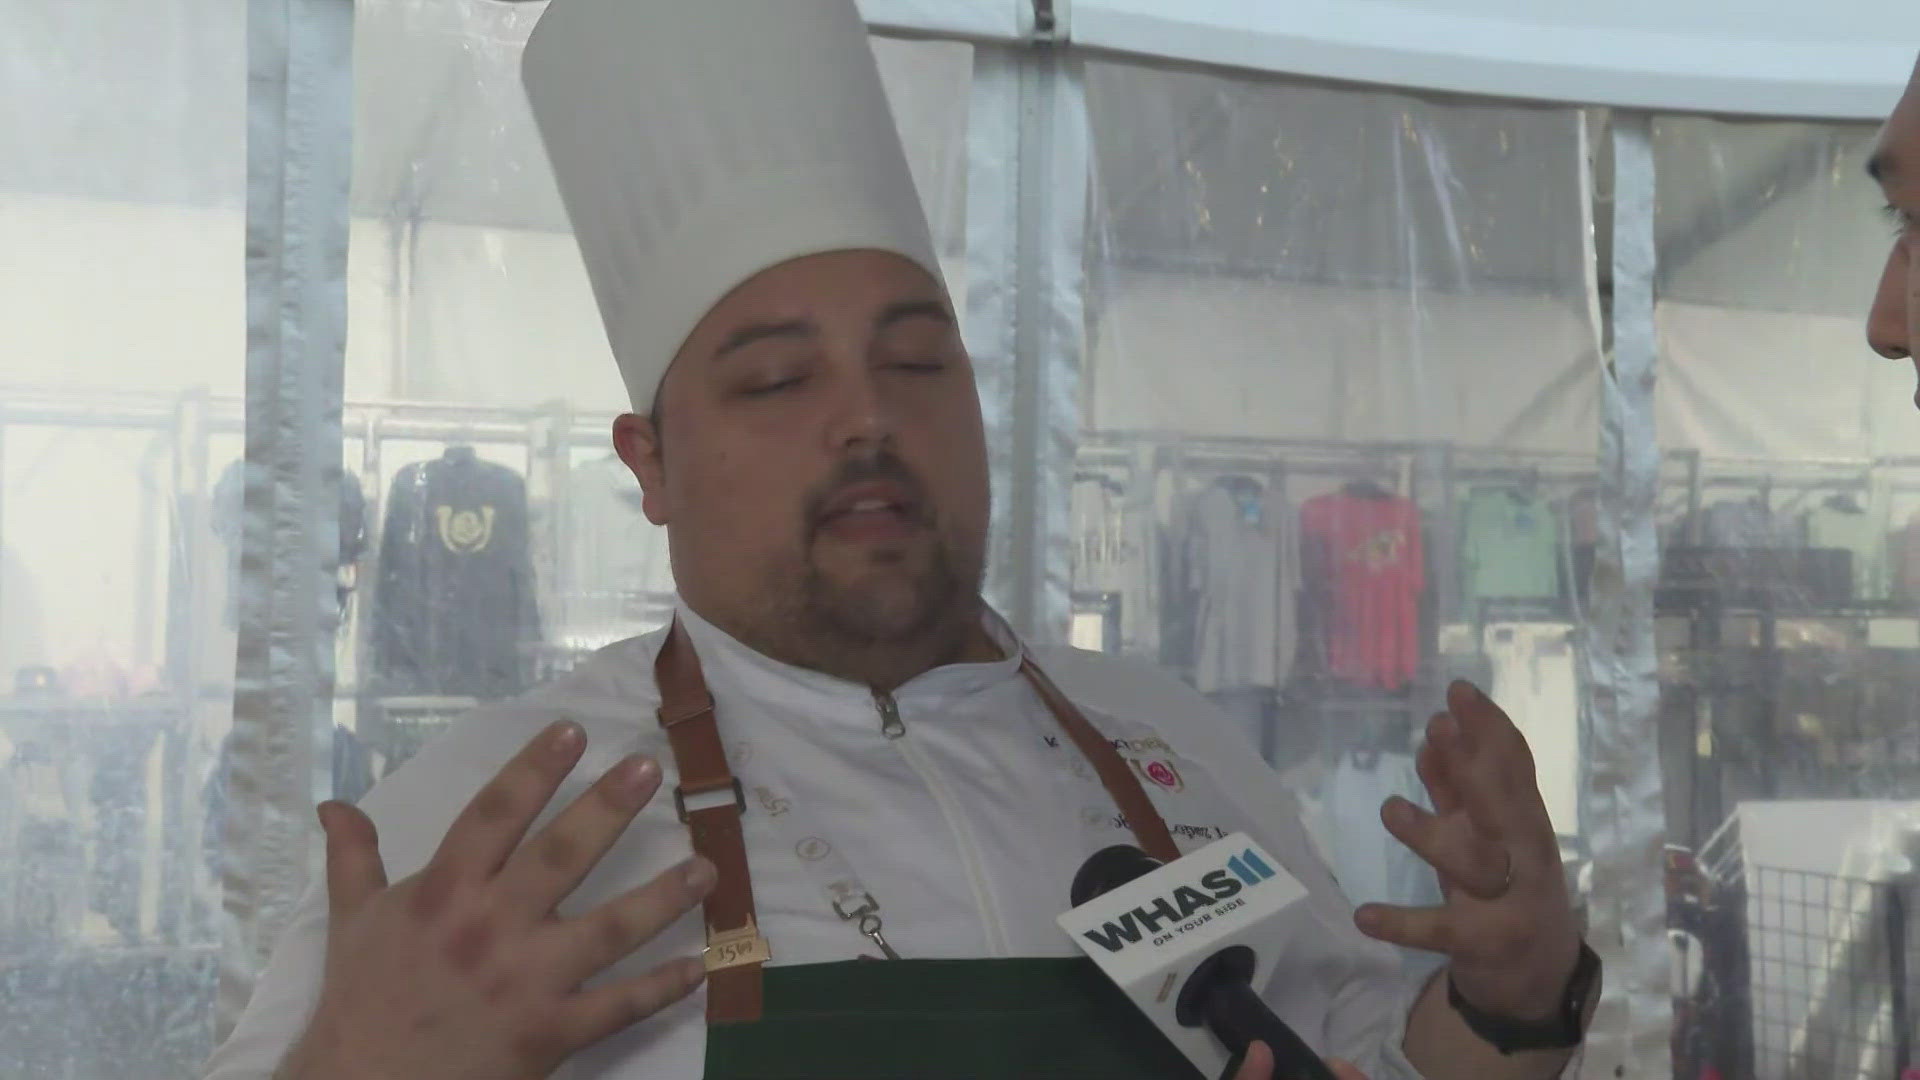 The biggest Derby is expected to bring in massive crowds. Chef Robert Lopez talks about the planning process behind food preparation for the Kentucky Derby.